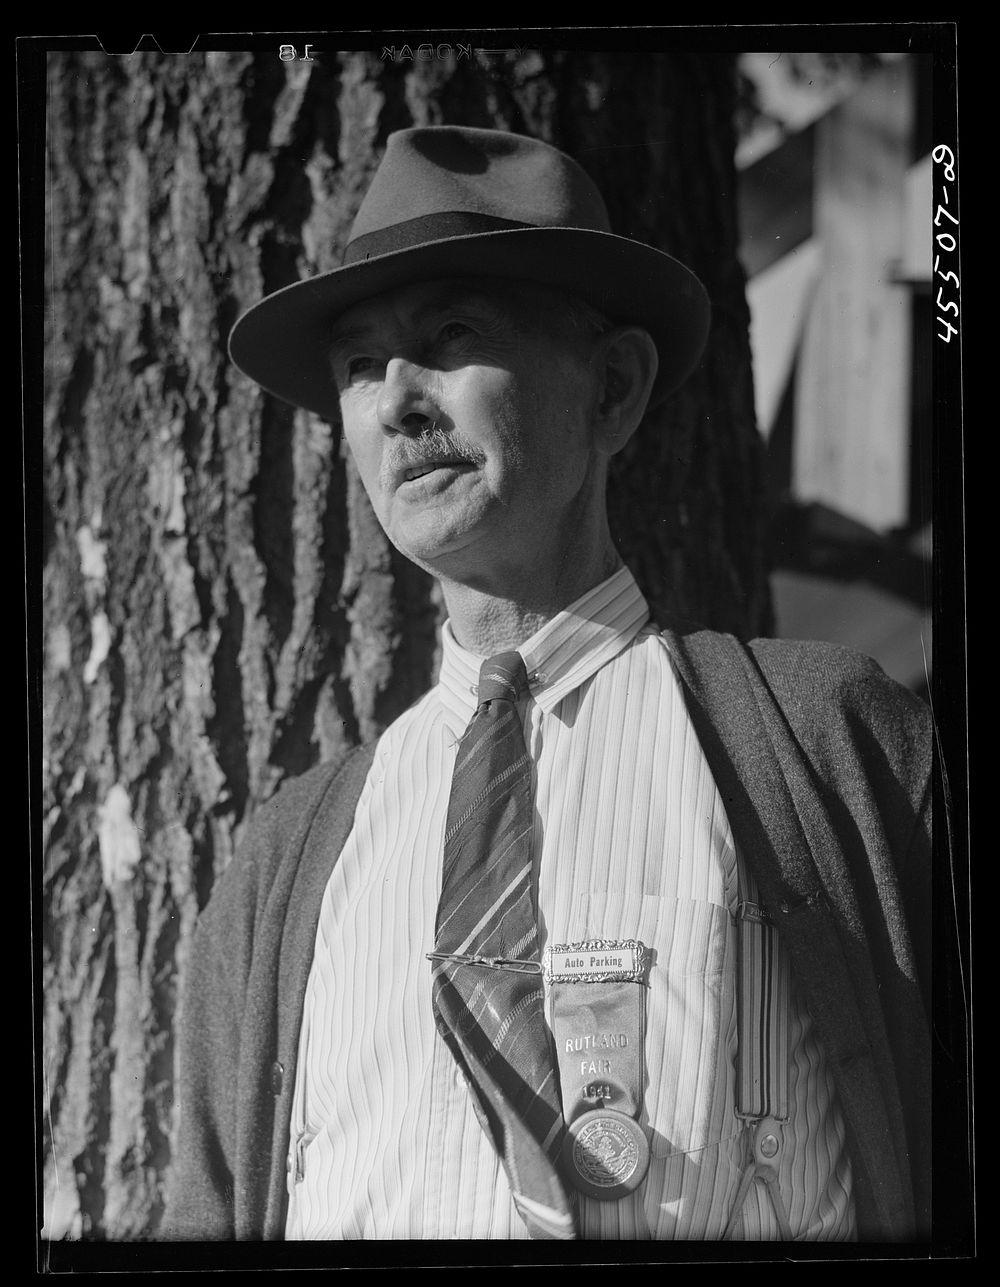 A committee member of the fair in charge of auto parking. Rutland Fair, Vermont. Sourced from the Library of Congress.